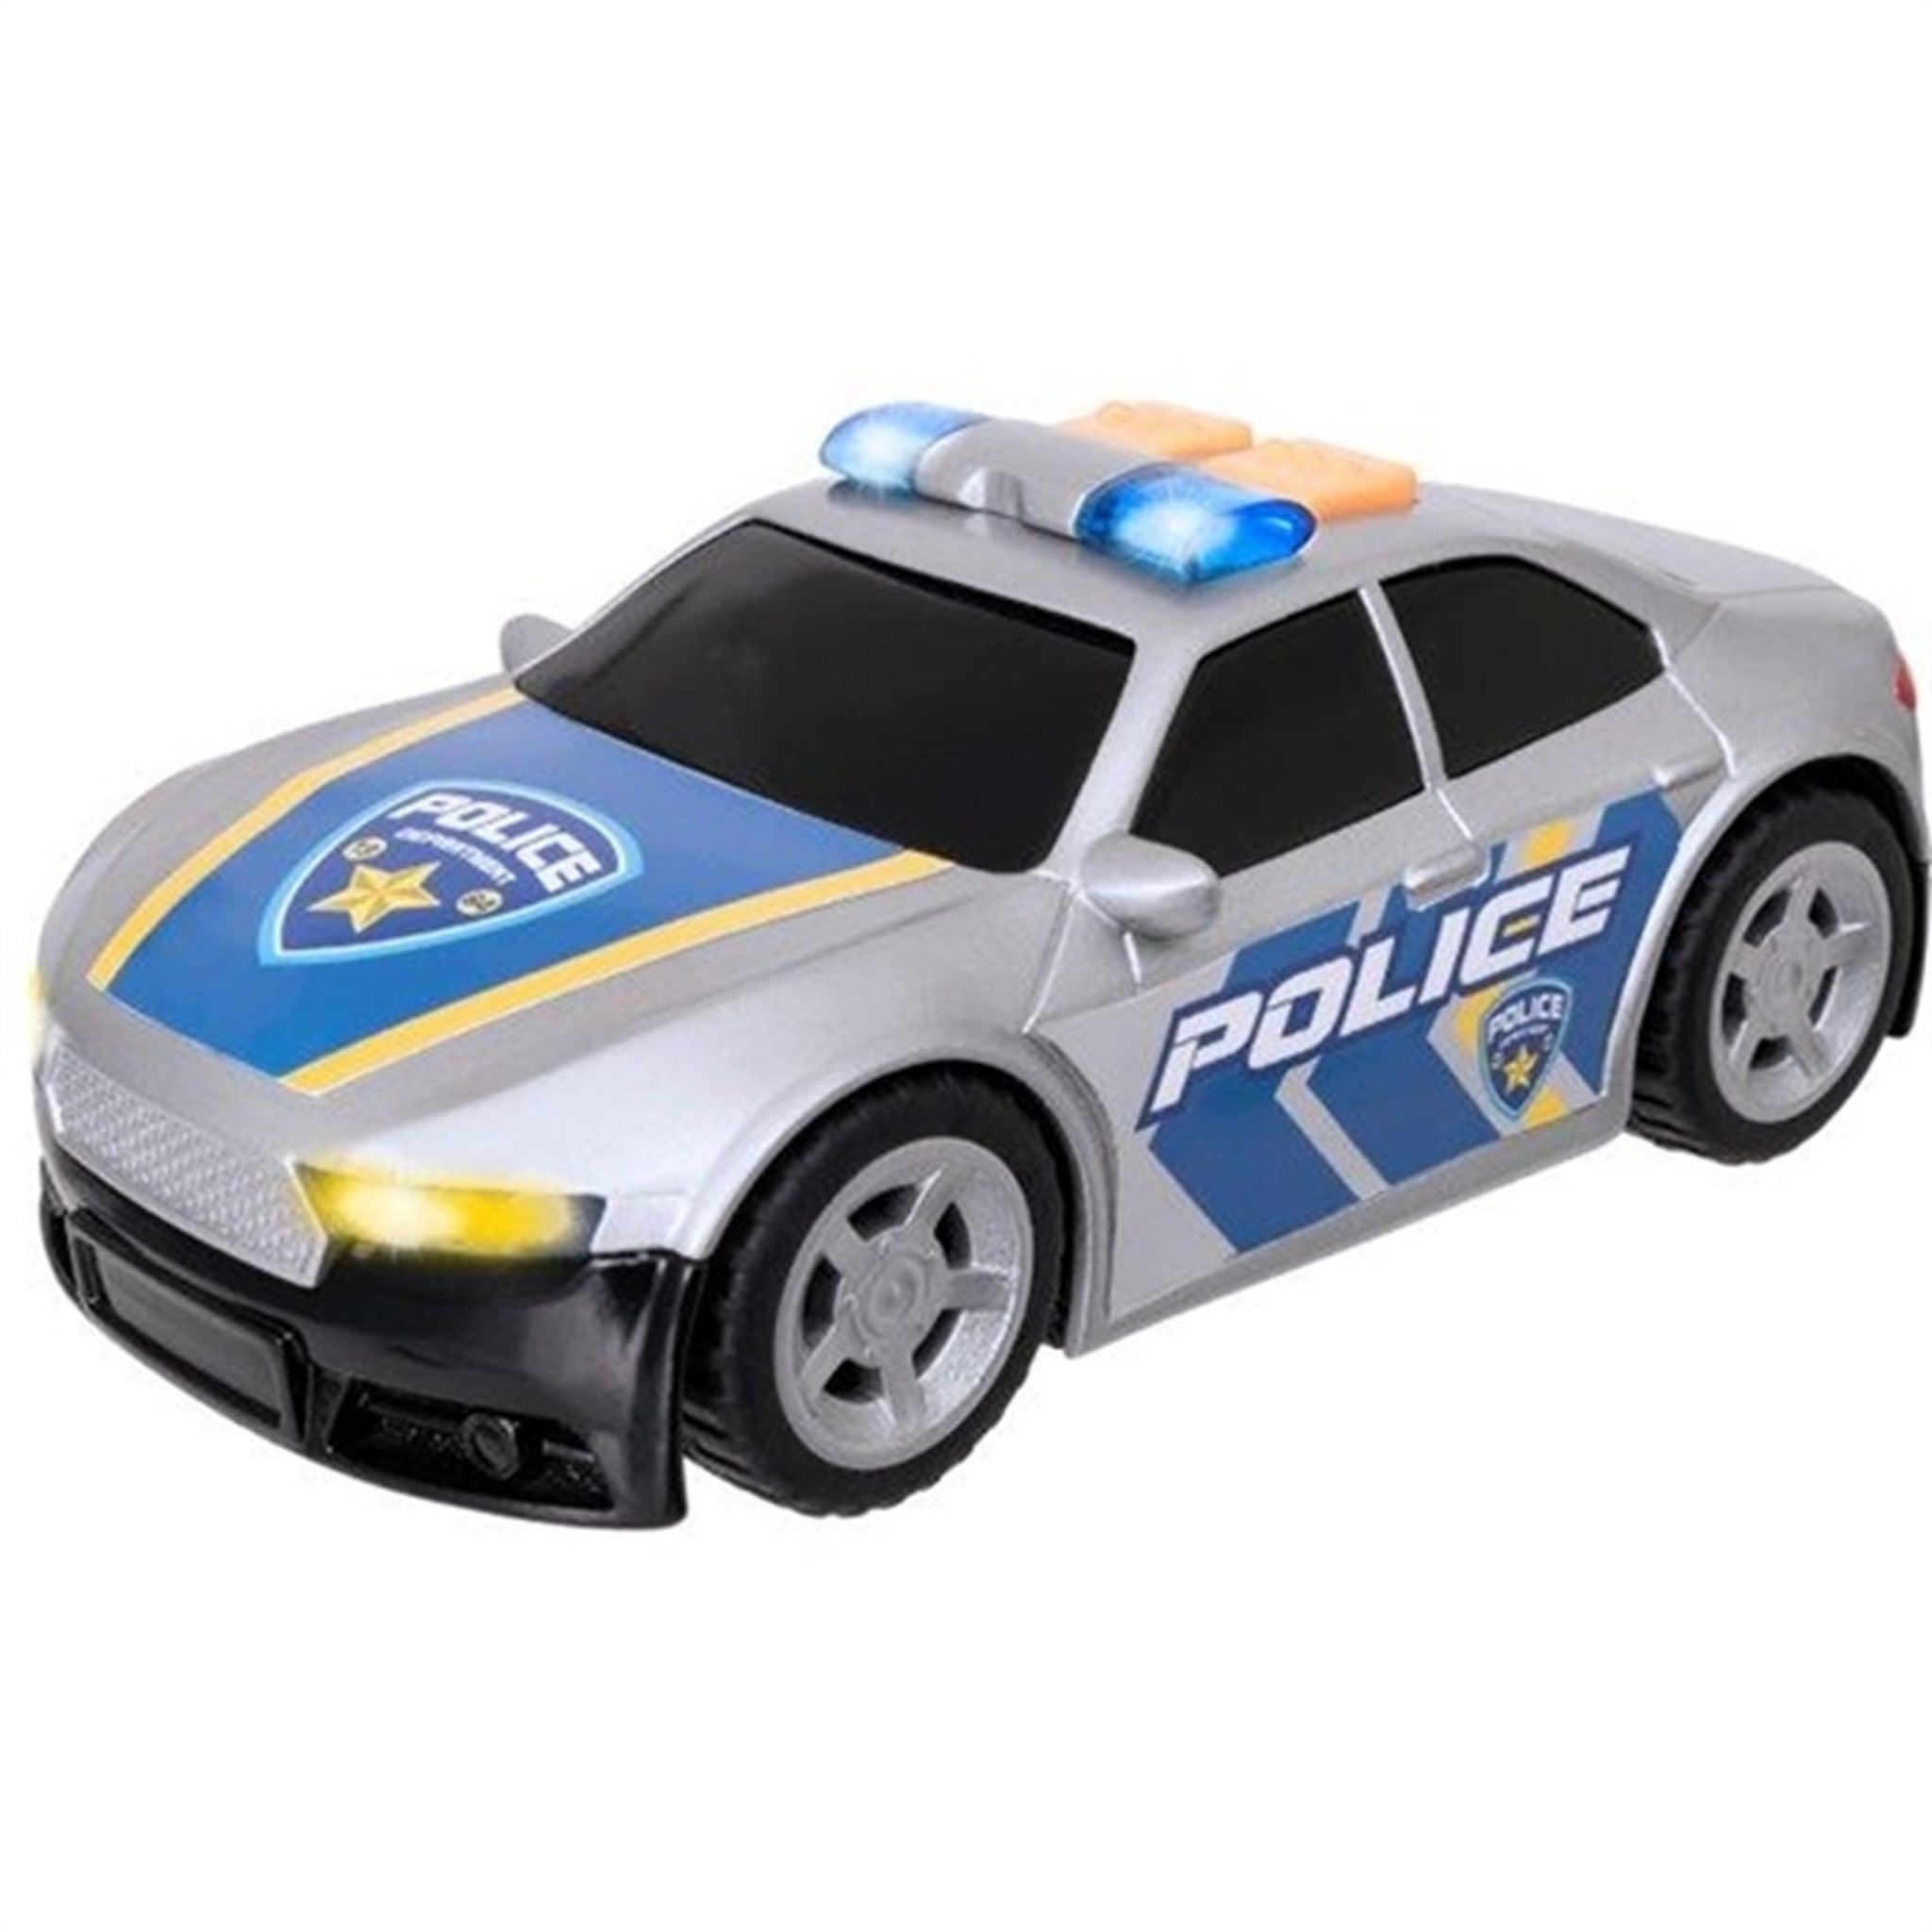 Teamsterz Small L&S Police Car 2